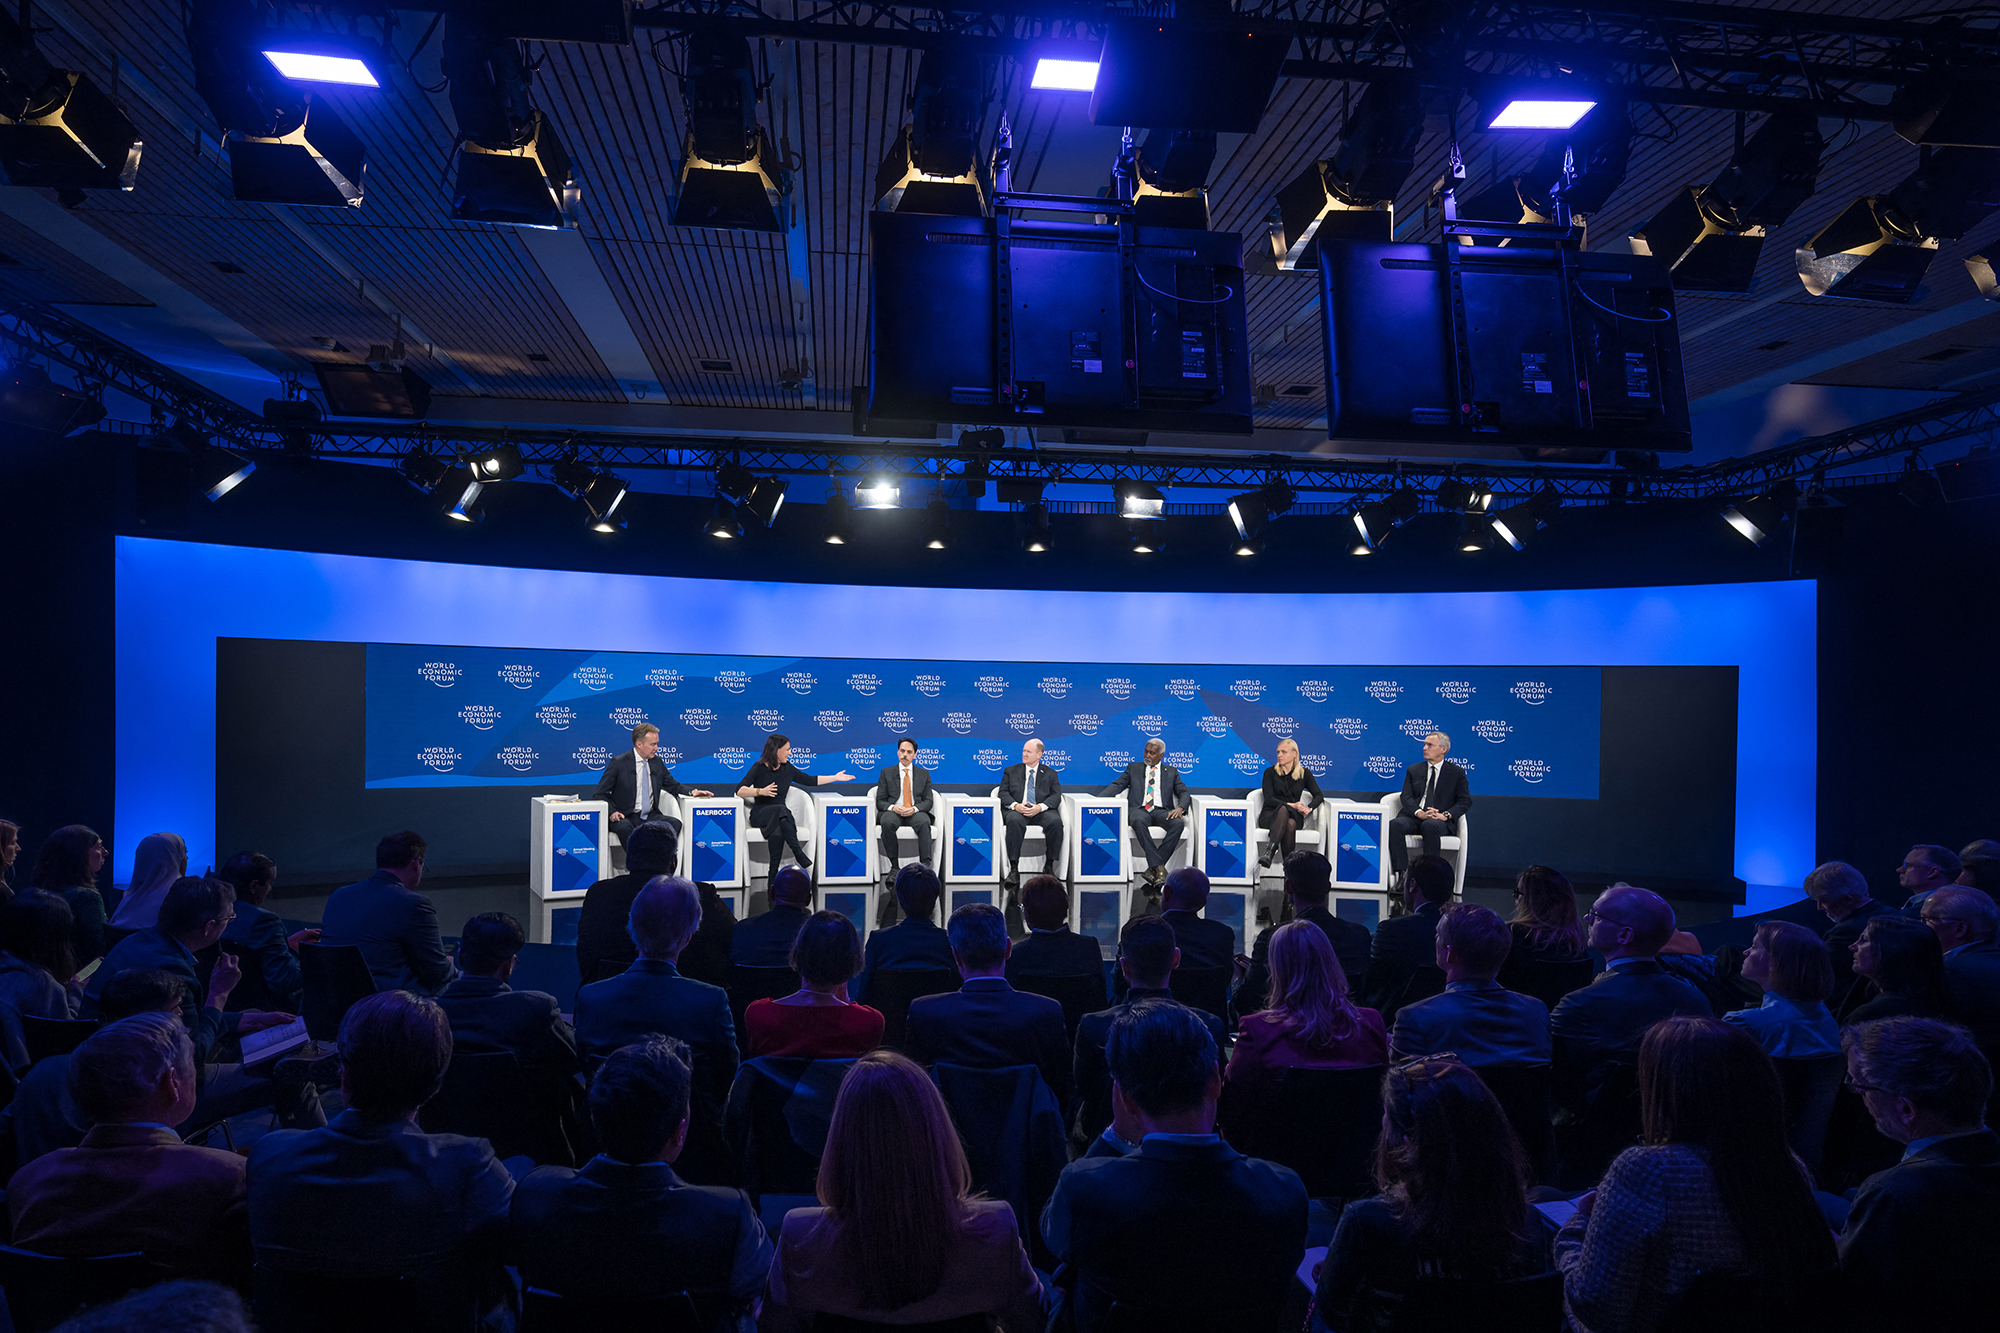 Left to right: WEF president Borge Brende, German Foreign Minister Annalena Baerbock, Saudi Arabia Foreign Minister Prince Faisal bin Farhan Al-Saud, Delaware Senator Christopher Coons, Nigerian Foreign Minister Yusuf Tuggar, Finland Foreign Minister Elina Valtonen and NATO Secretary General Jens Stoltenberg attend a session at the World Economic Forum (WEF) annual meeting in Davos, Switzerland, on January 16.